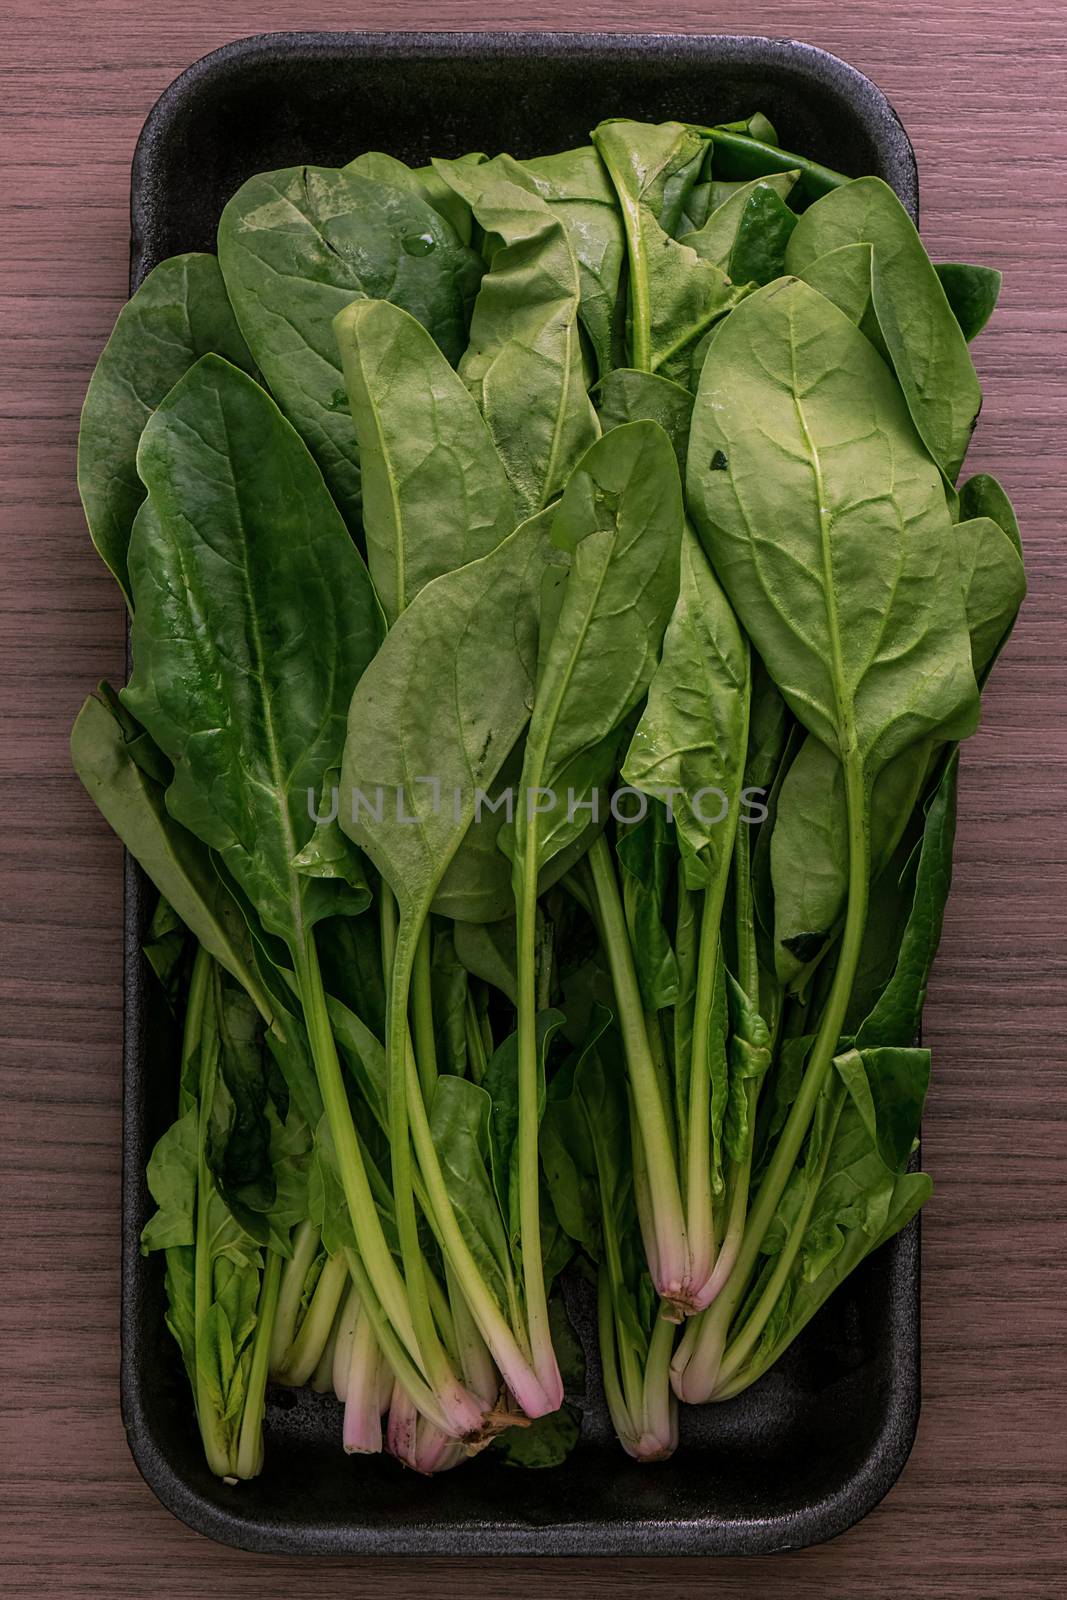 Green spinach by dalomo84